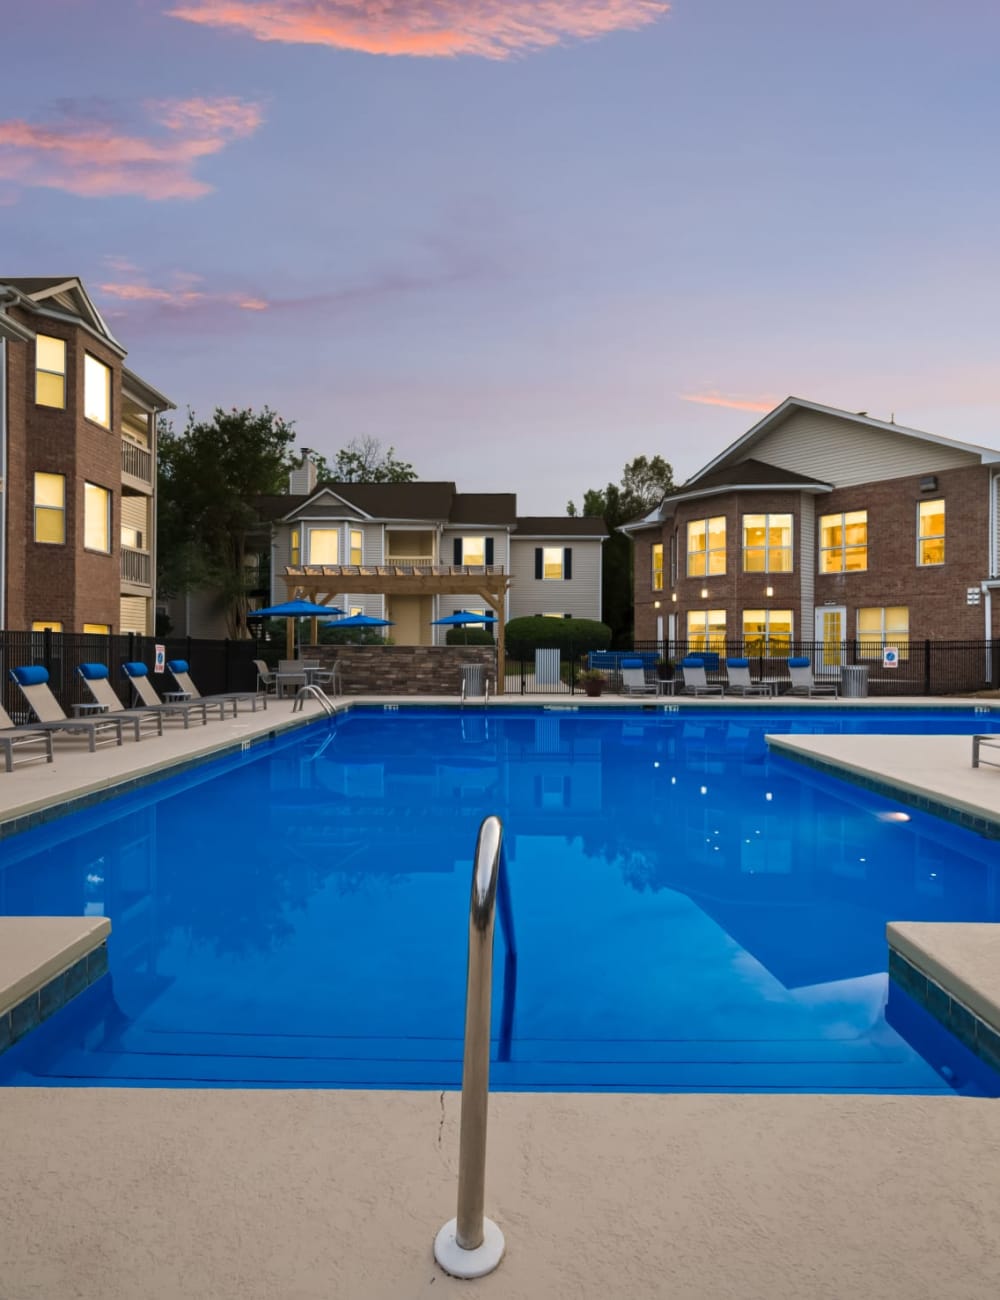 The blue community swimming pool at Chace Lake Villas in Birmingham, Alabama